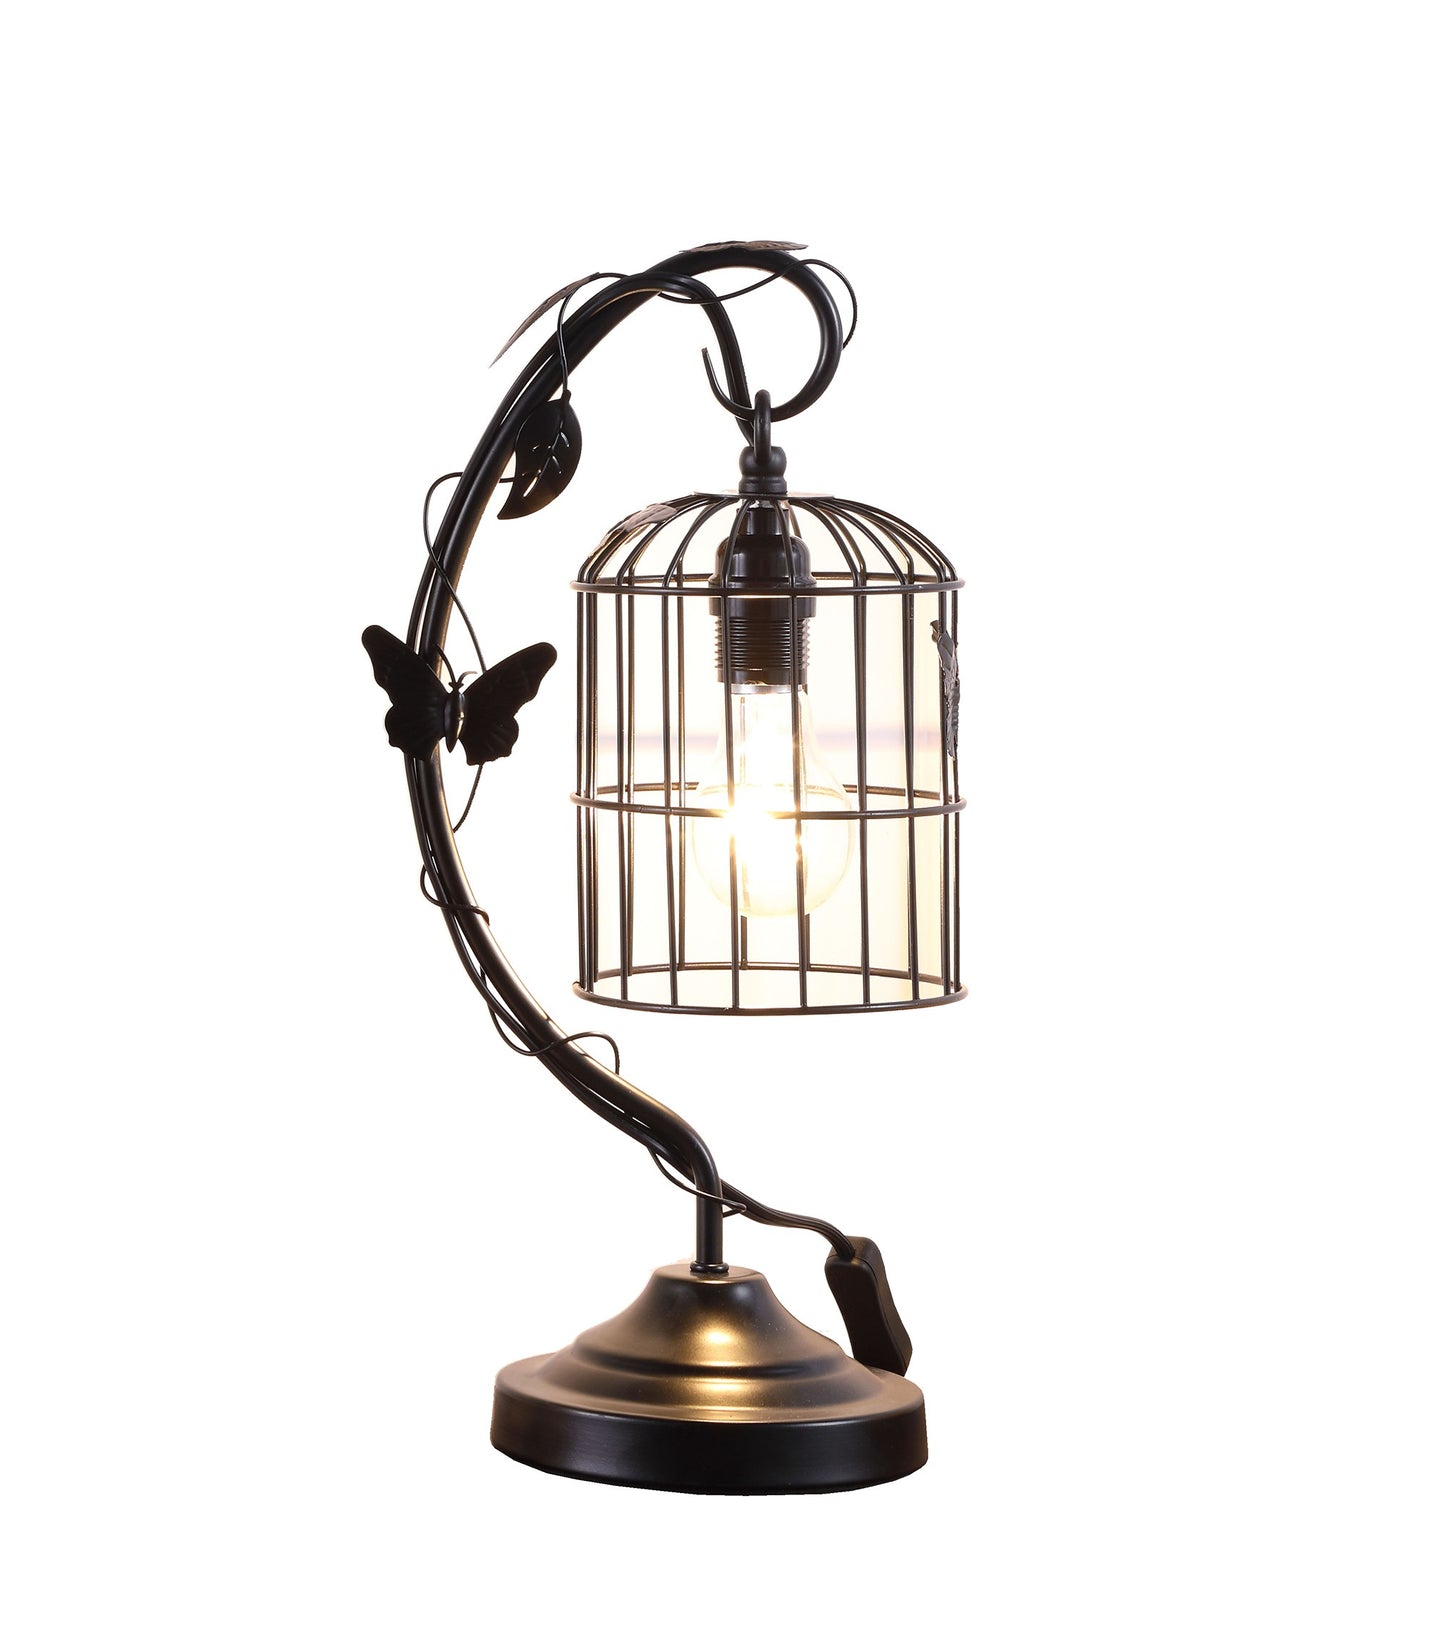 18" Black Bedside Table Lamp With Black Cage Shade